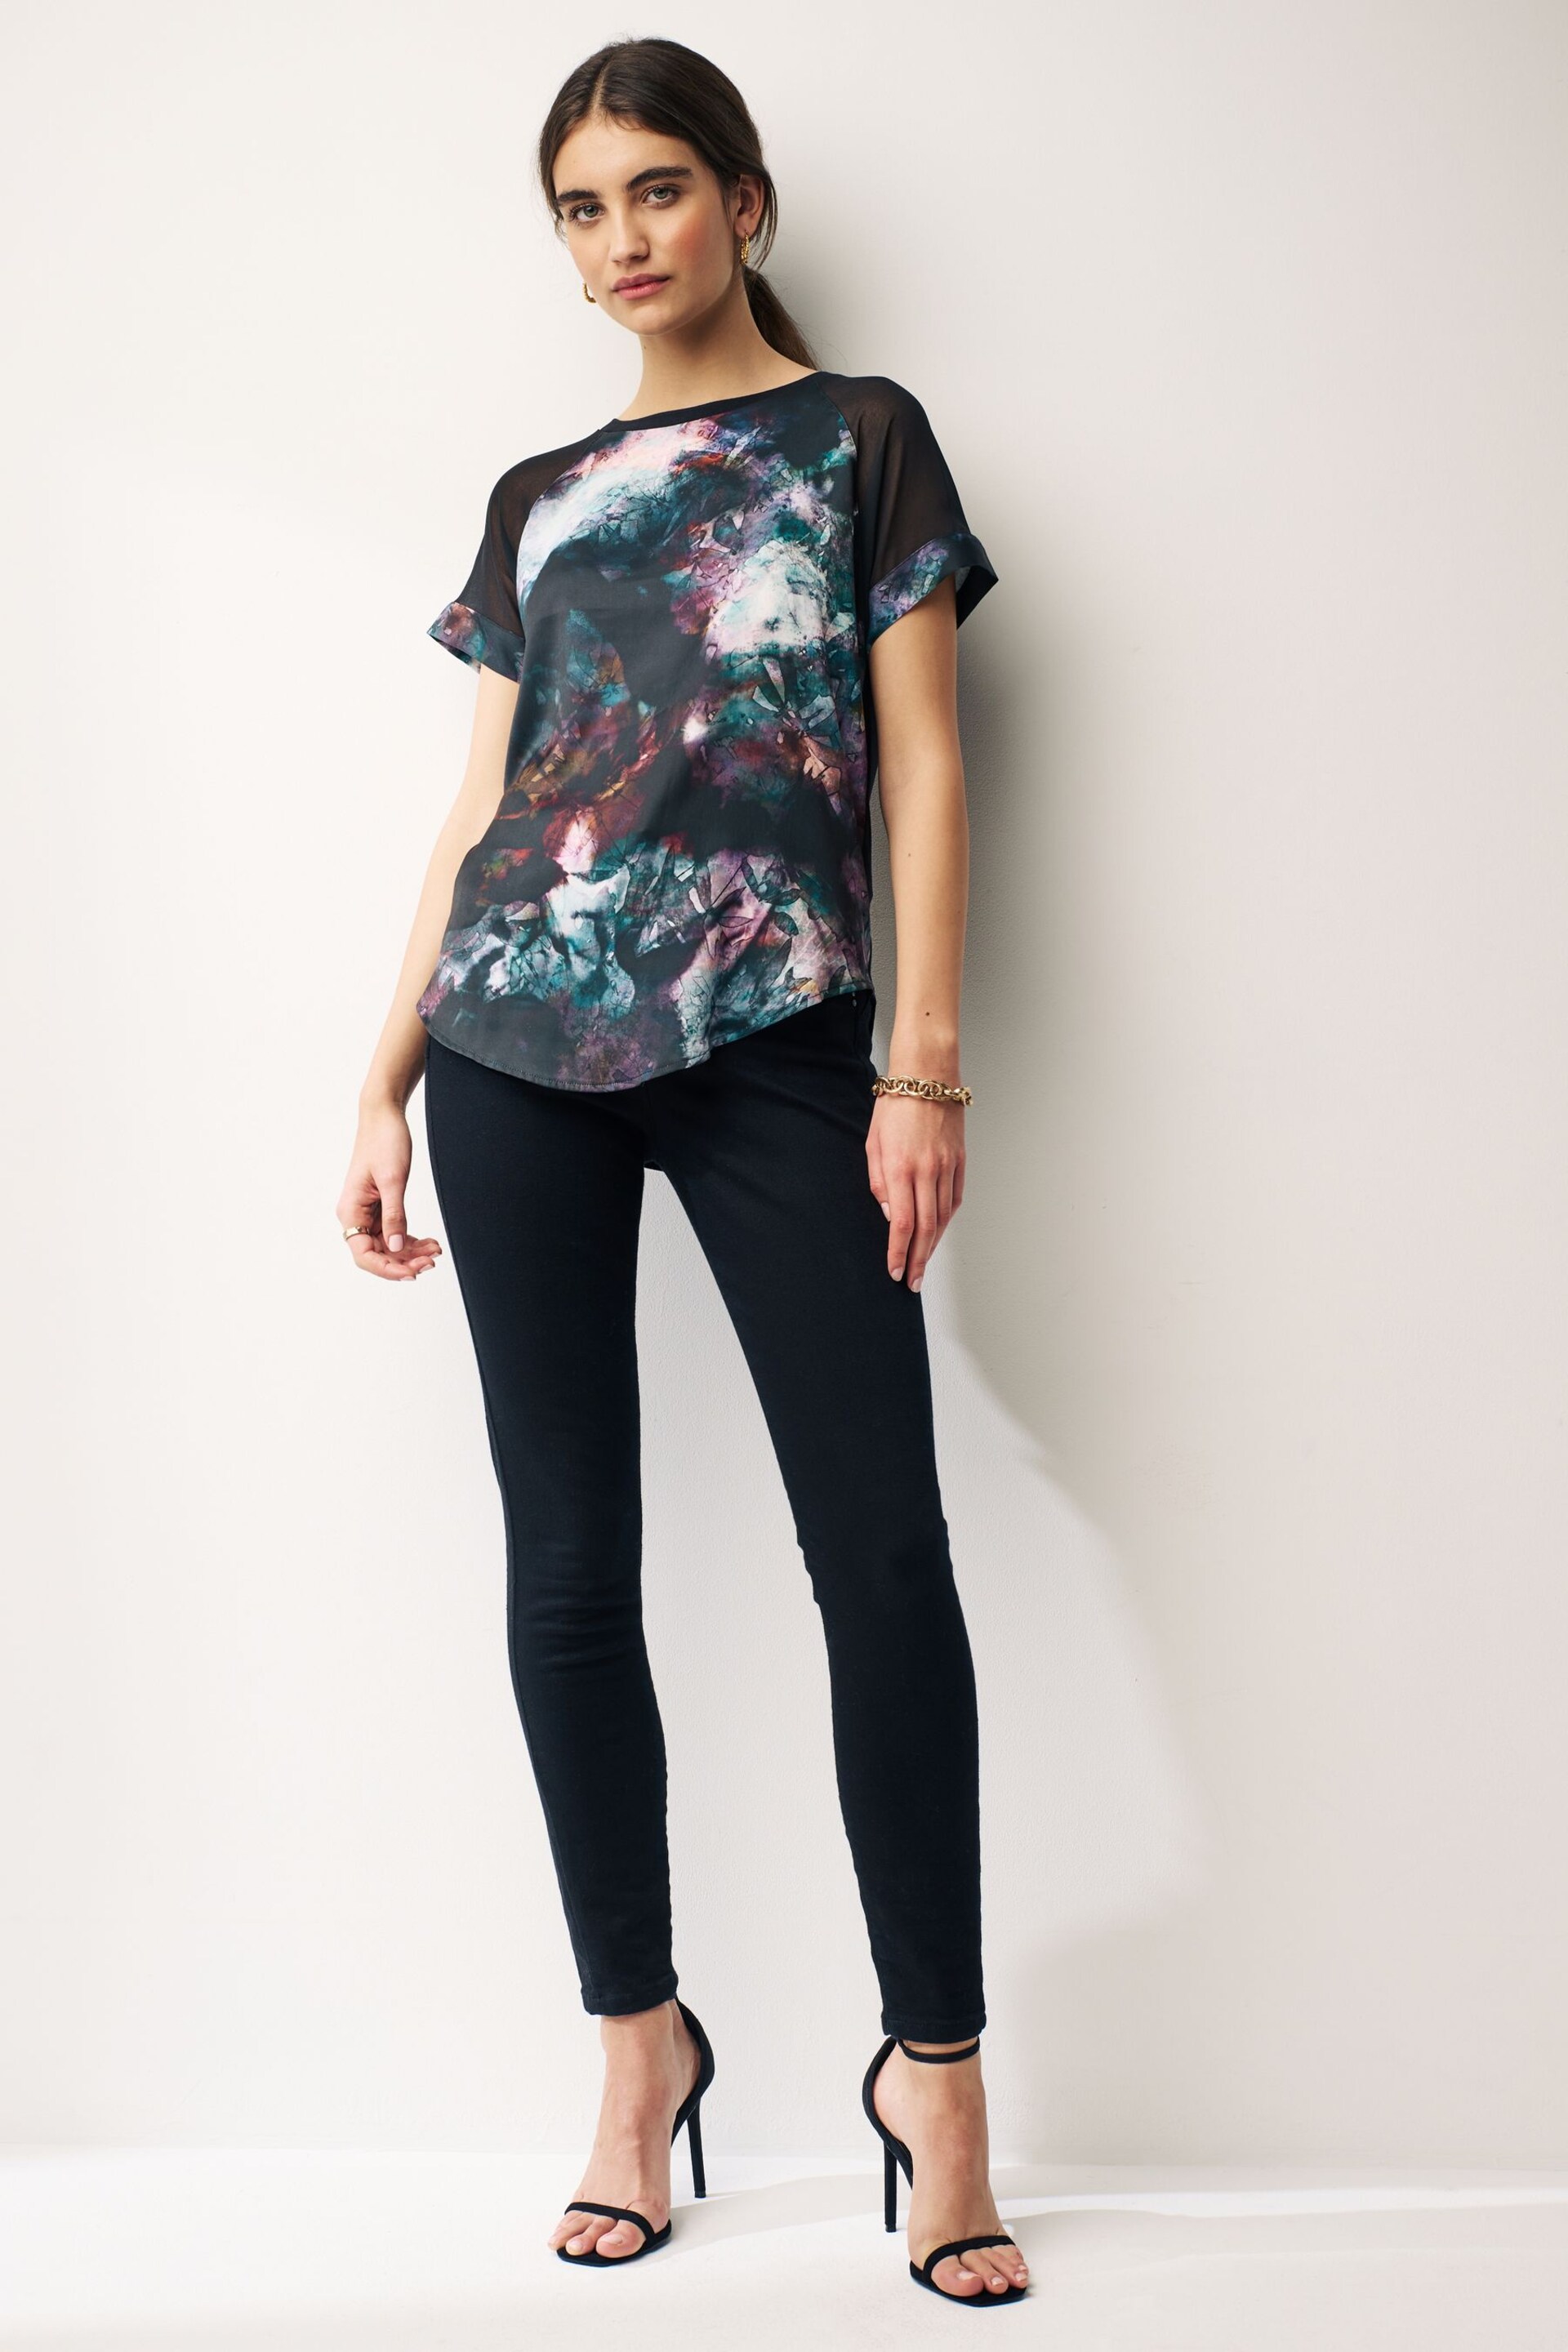 Blurred Floral Woven Mix Short Sleeve Raglan T-Shirt - Image 2 of 7